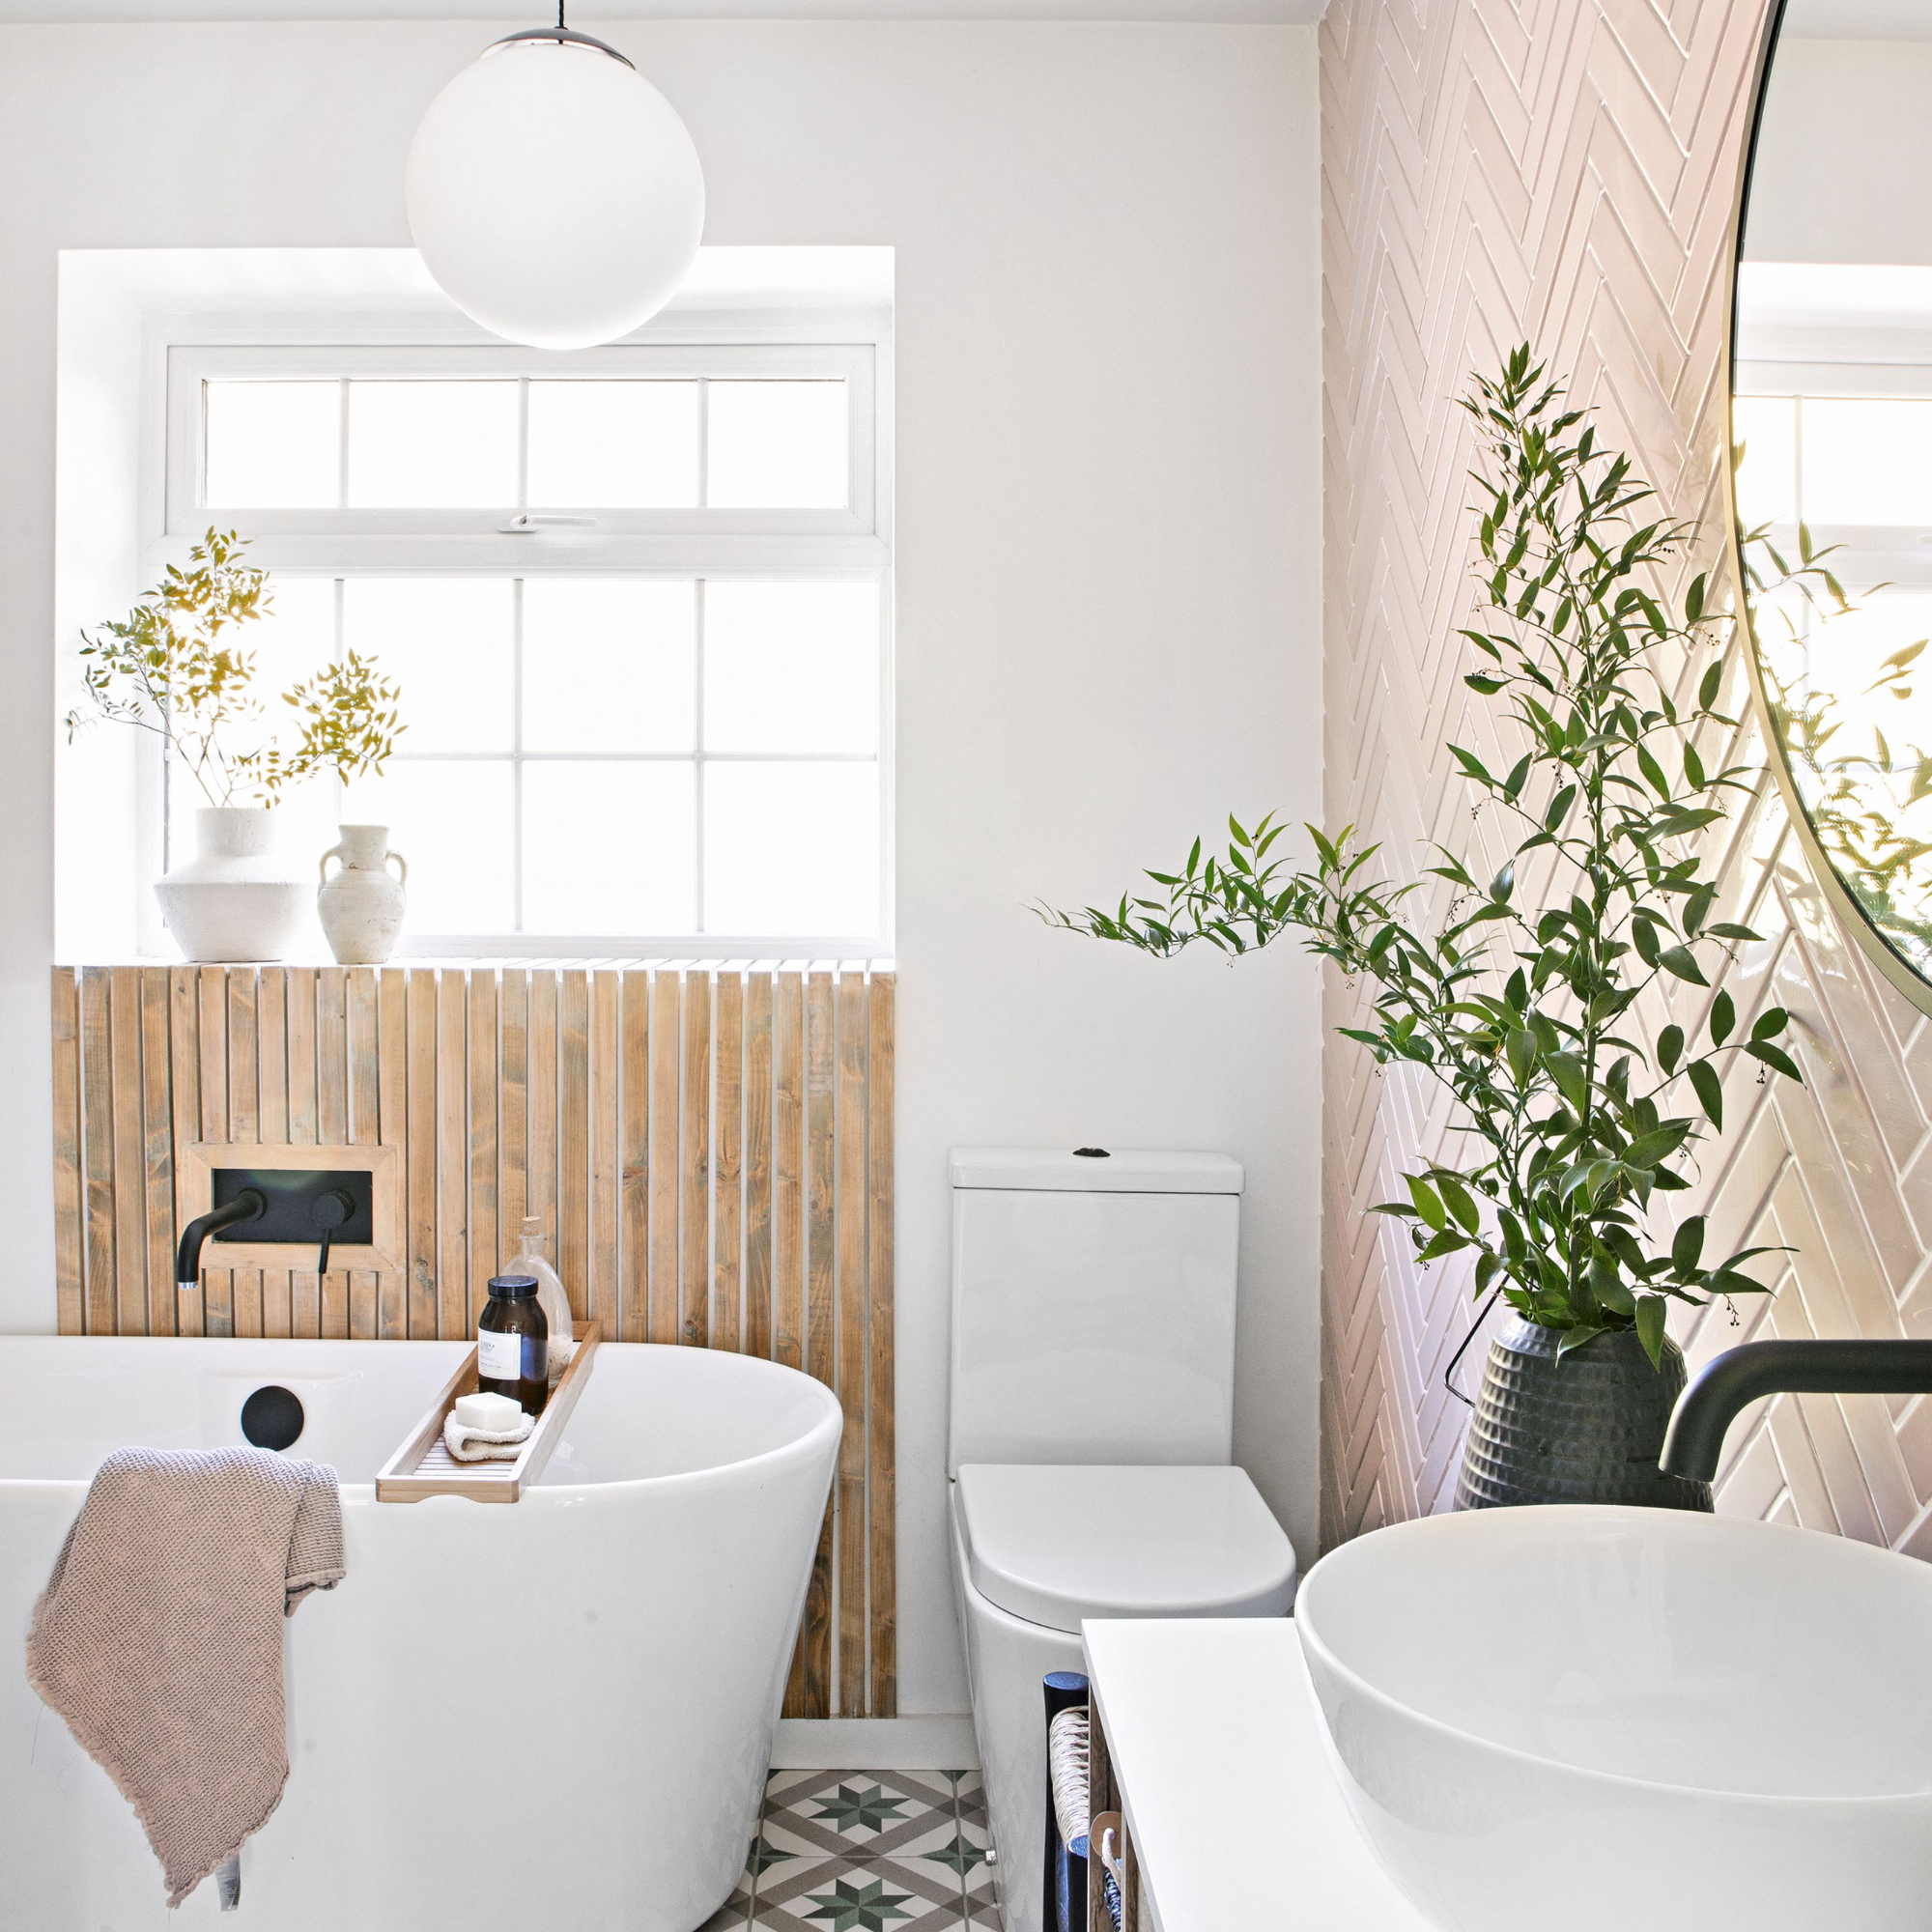 White painted bathroom with tiled accent wall and wooden wall panelling, bathtub and toilet